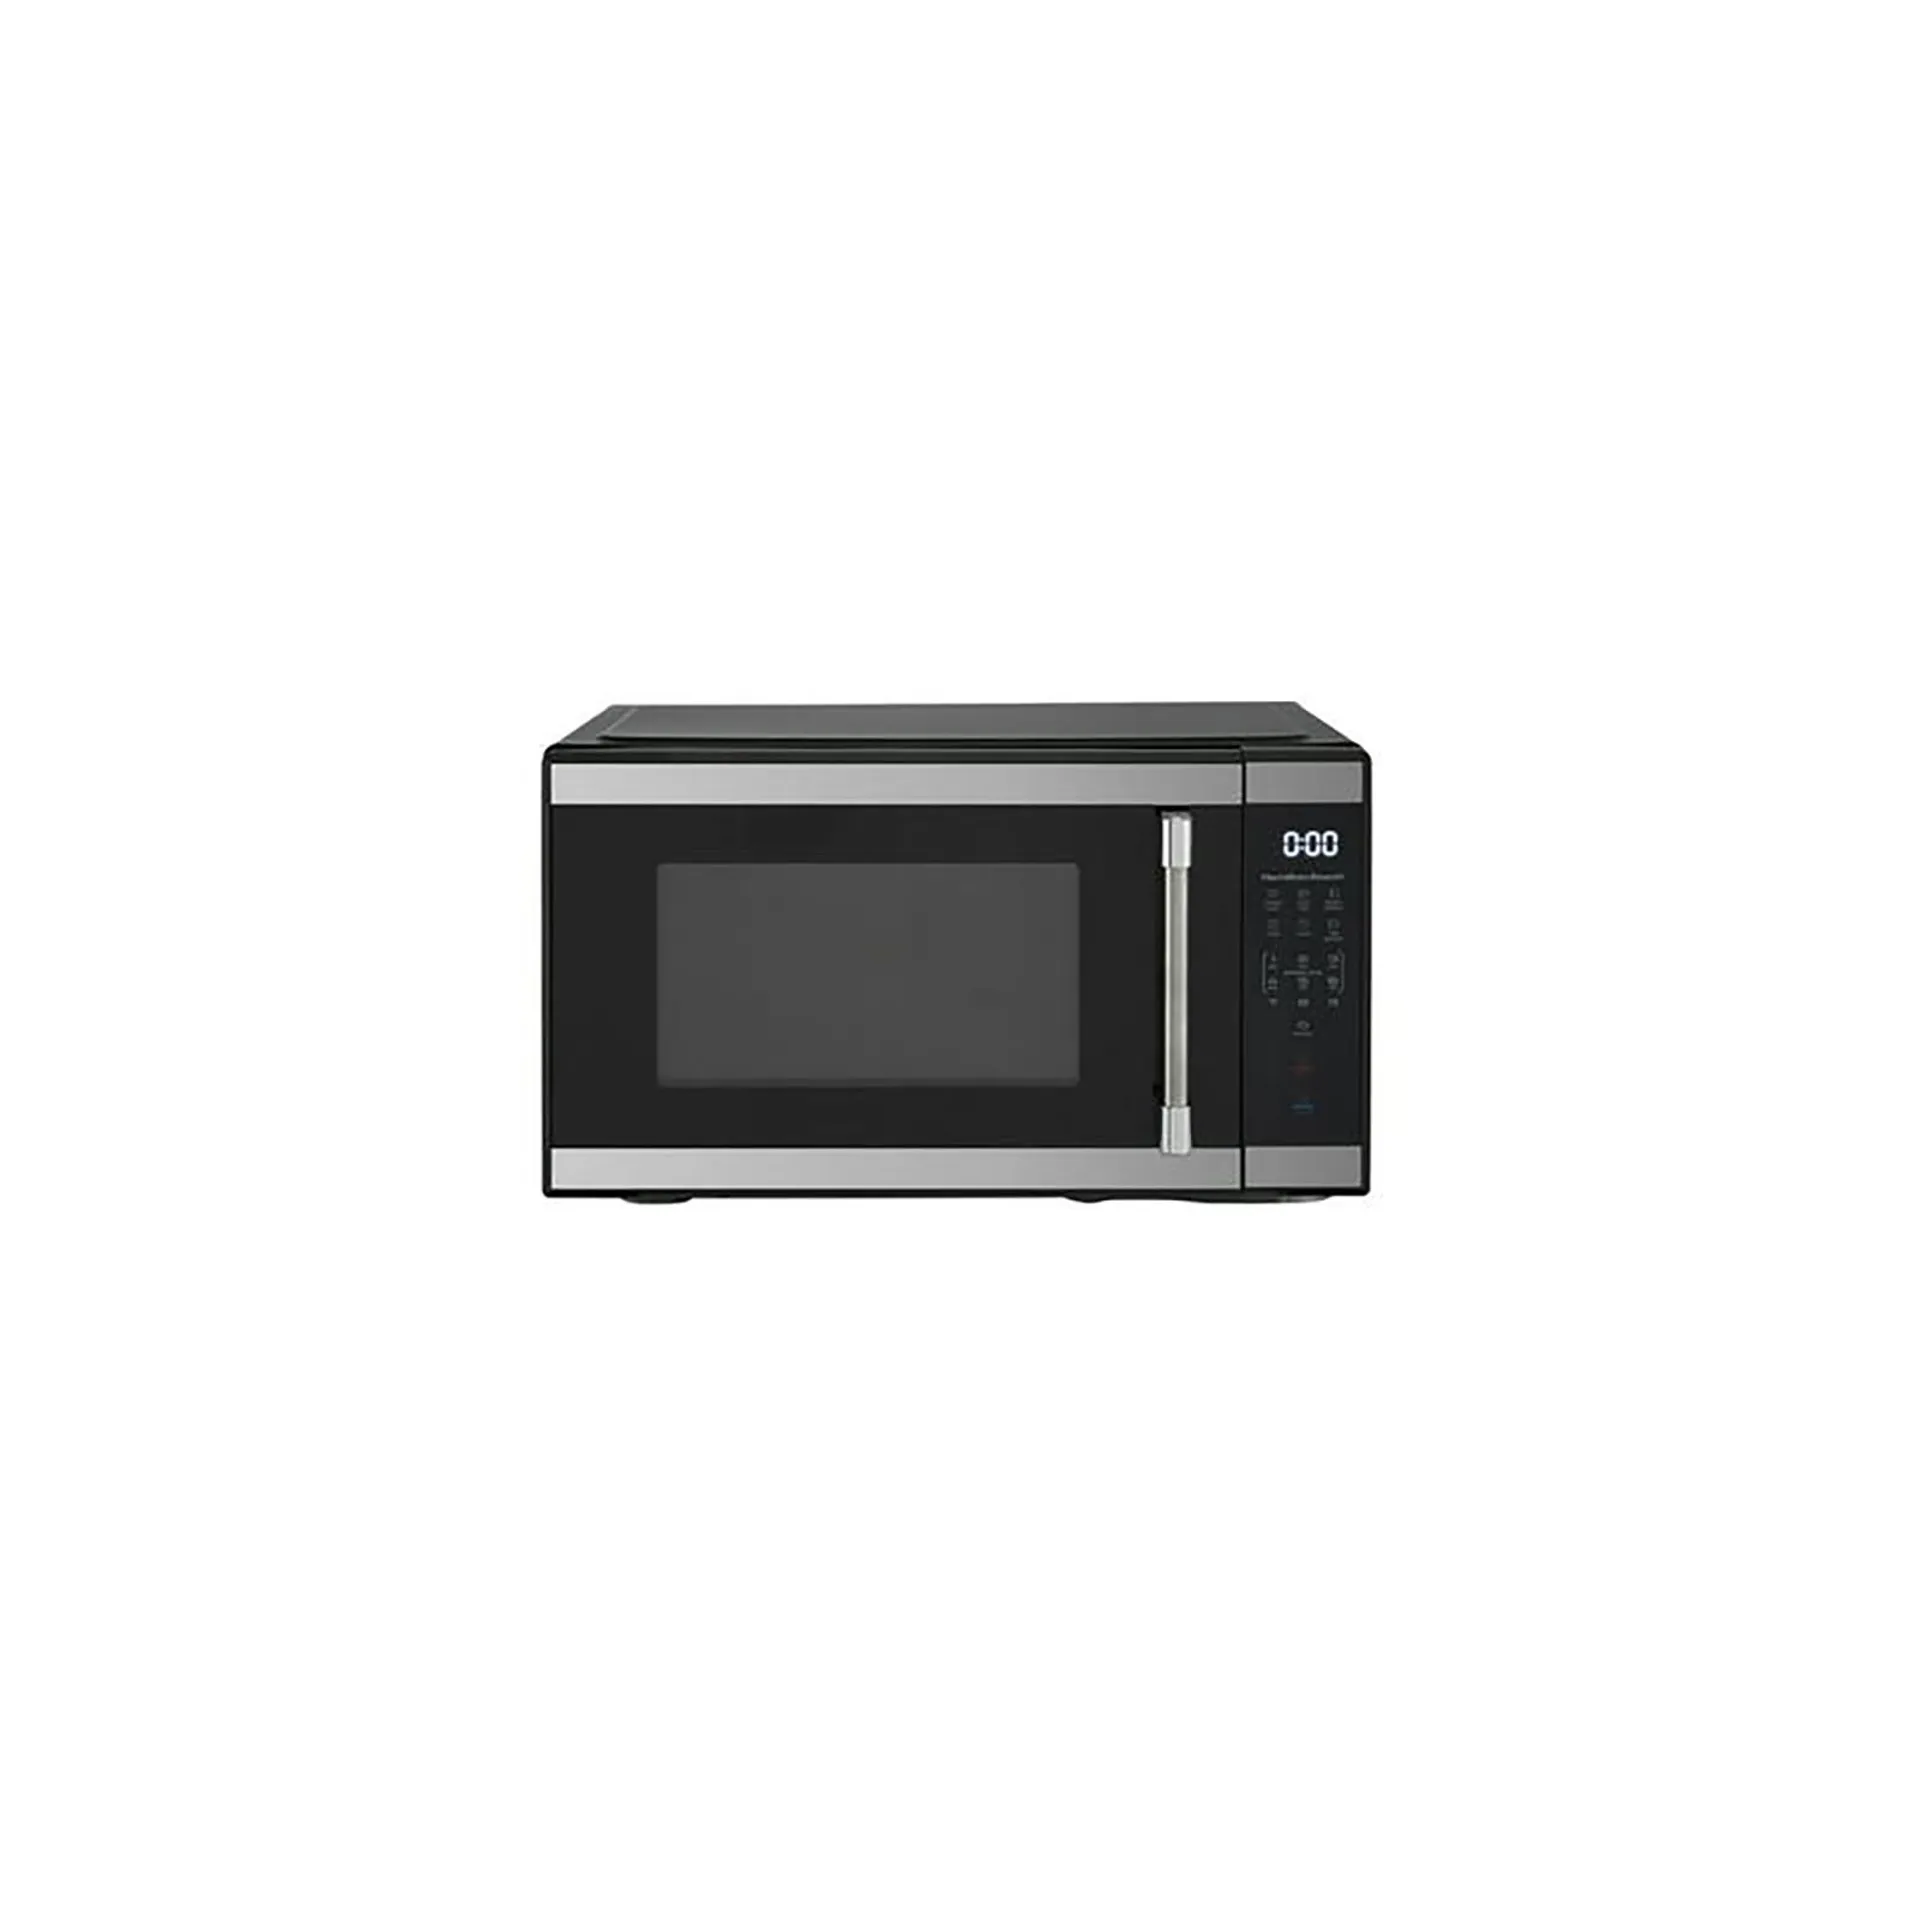 Hamilton Beach Brands Inc. EM031M2ZCX1 1000W Countertop Microwave Oven - Stainless Steel